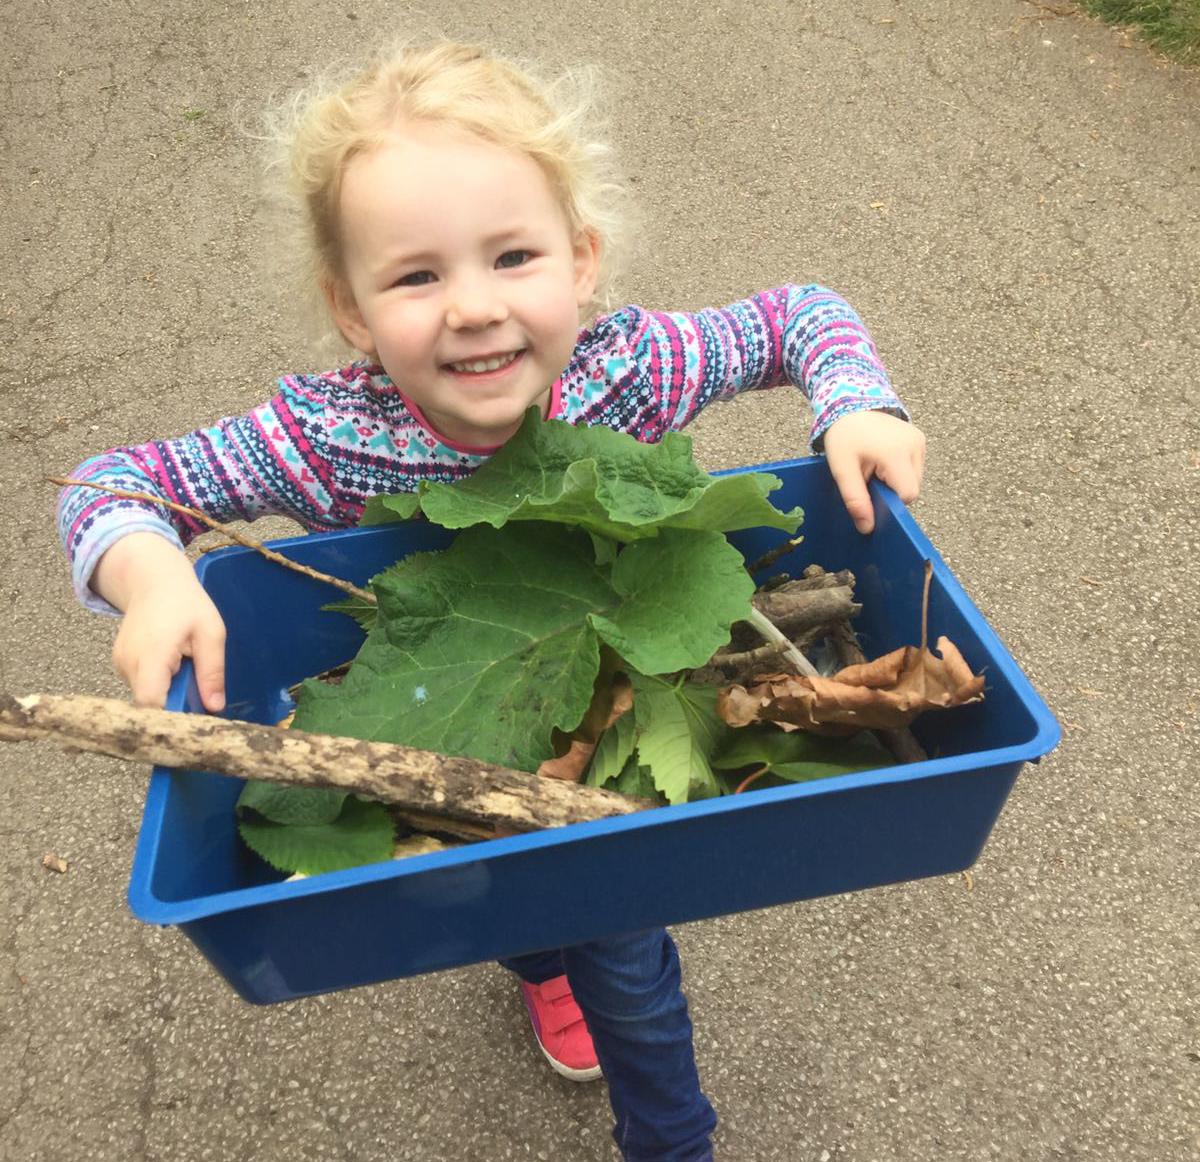 Child holding a box filled with sticks and leaves